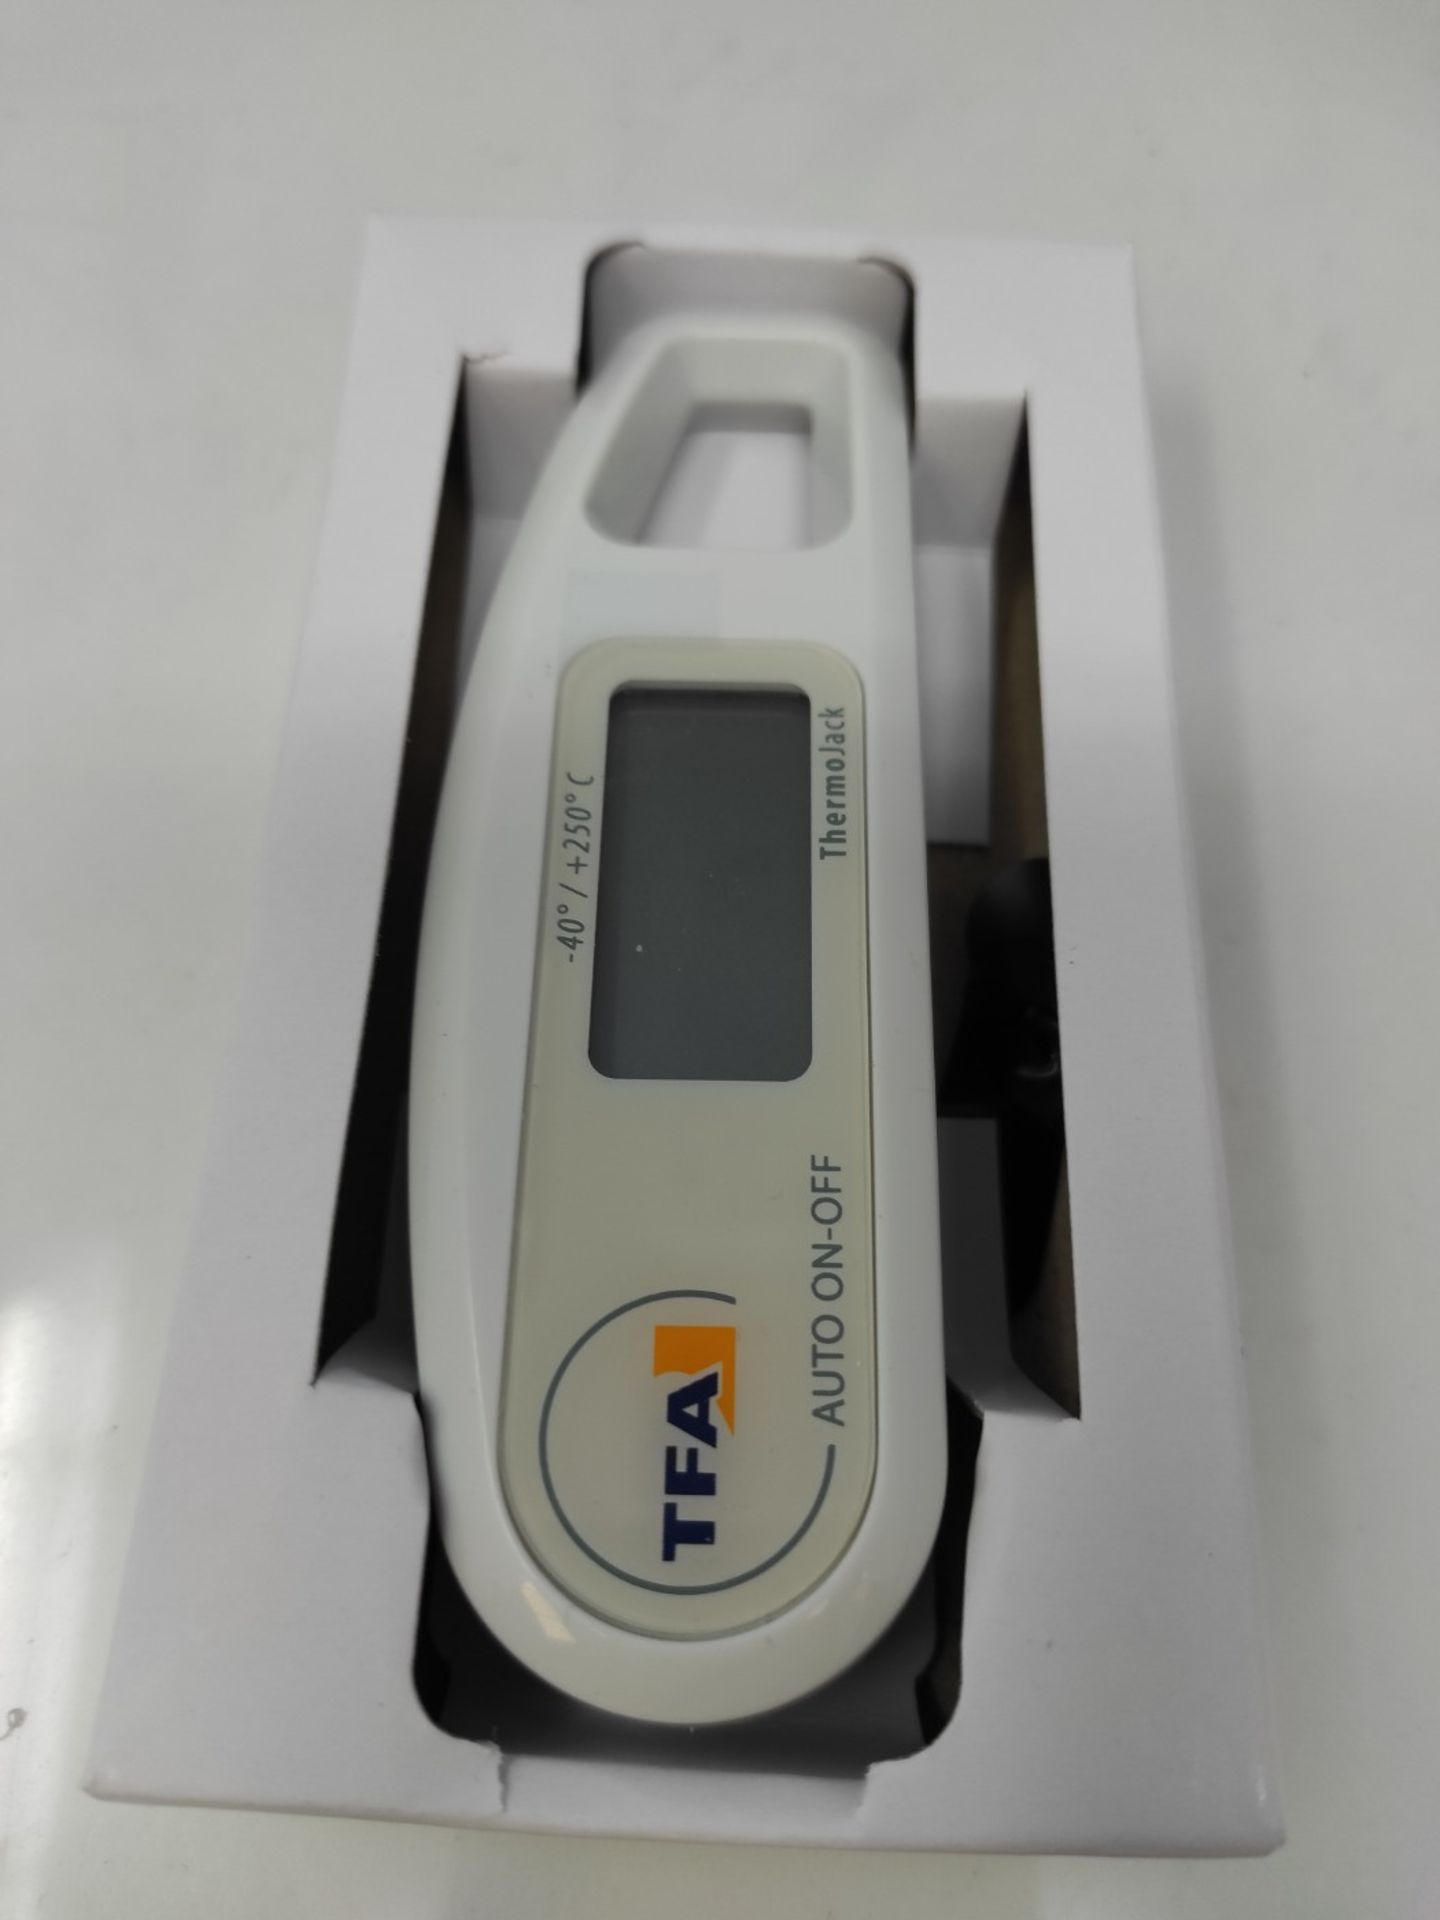 TFA Dostmann Thermo Jack digital penetration thermometer, 30.1047.02, temperature cont - Image 3 of 3